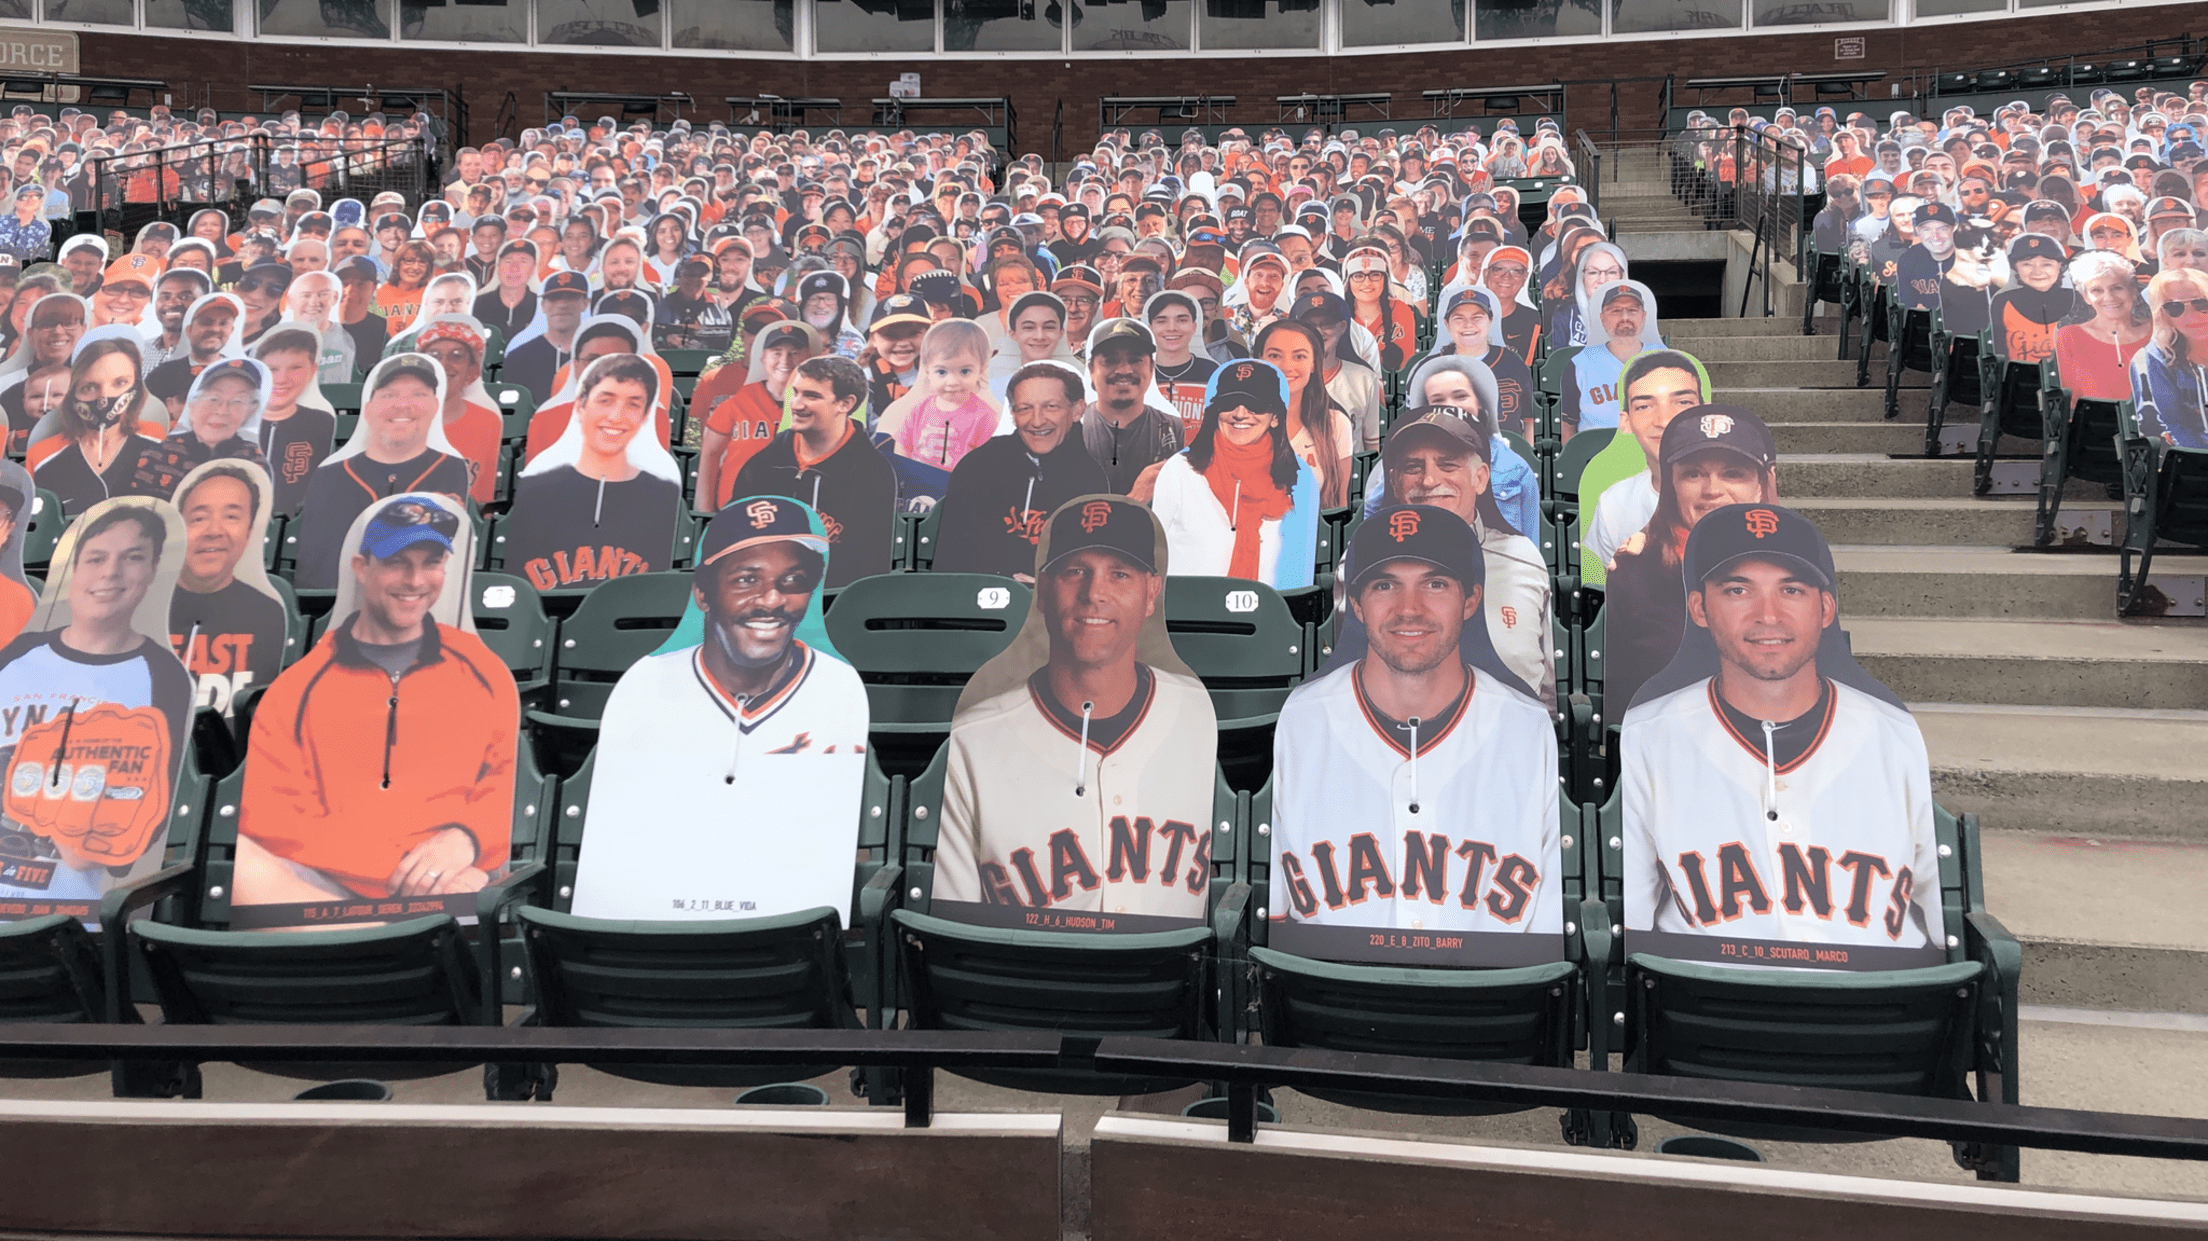 World Series: S.F. Giants, Detroit Tigers' Celebrity Fans – The